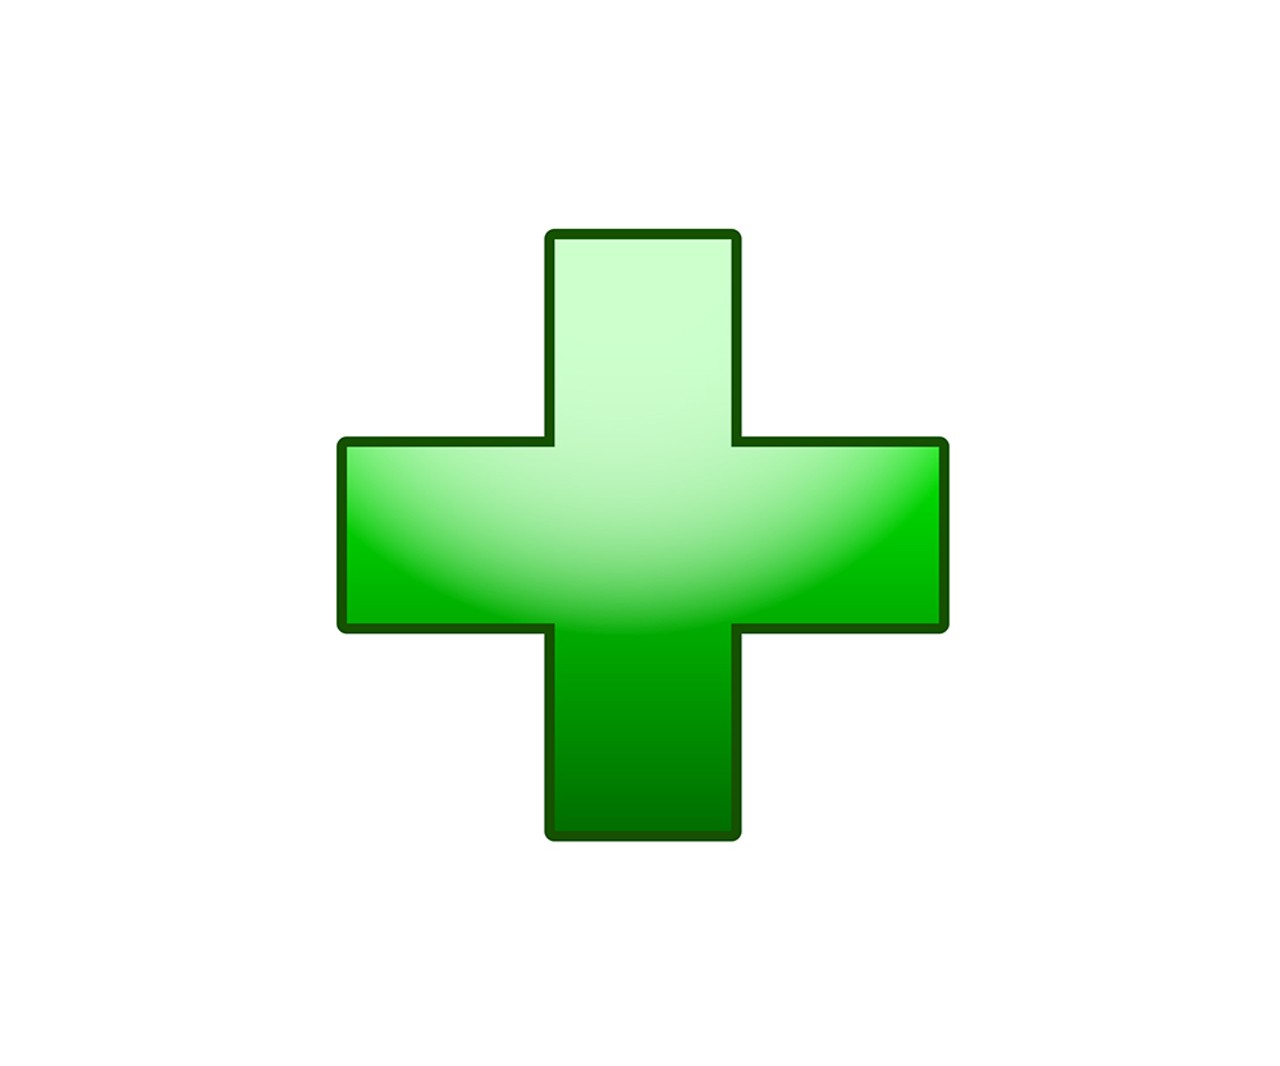 Medicinal marijuana
What it is: There was a time when ambiguous text messages referred to &#147;trees&#148; or other code words for the sticky-icky. But with the coming of medical marijuana, there&#146;s no need to be so cryptic. In fact, dispensaries routinely light up their buildings with the &#147;green cross.&#148; 
When to use it: When seeking or buying medicine to treat your illness, of course!